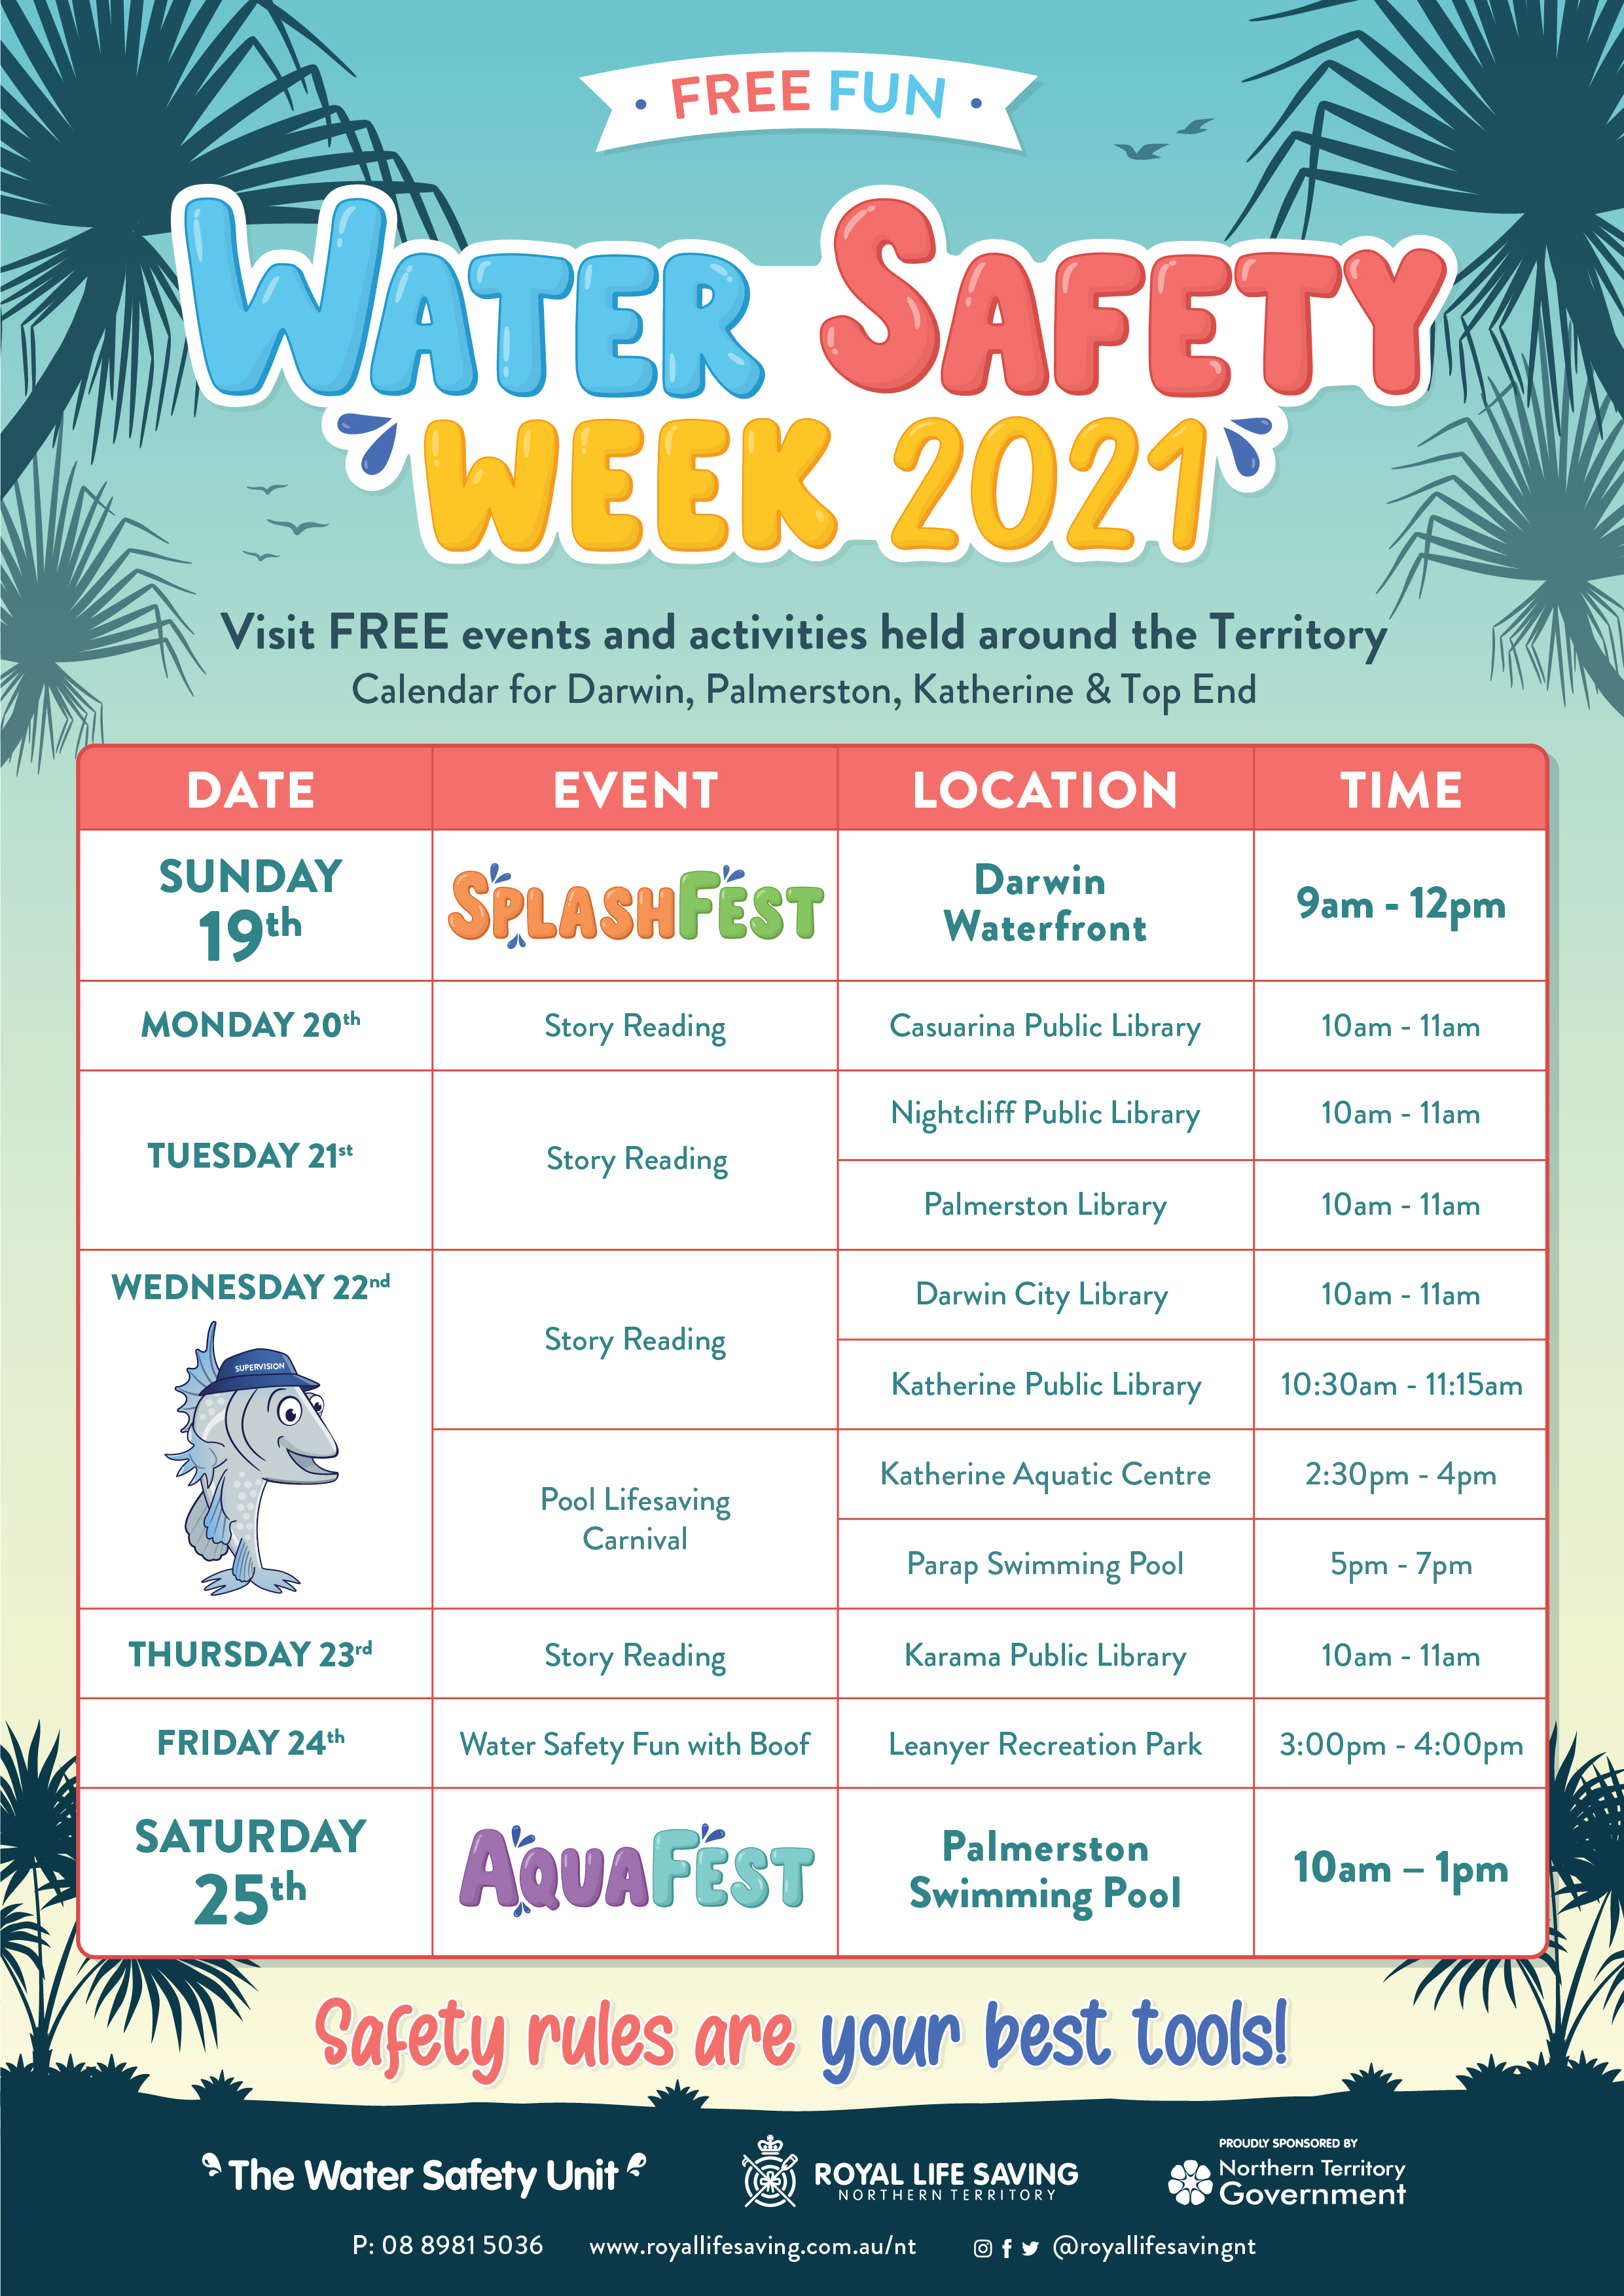 Water Safety Week Calendar - Darwin and Top End